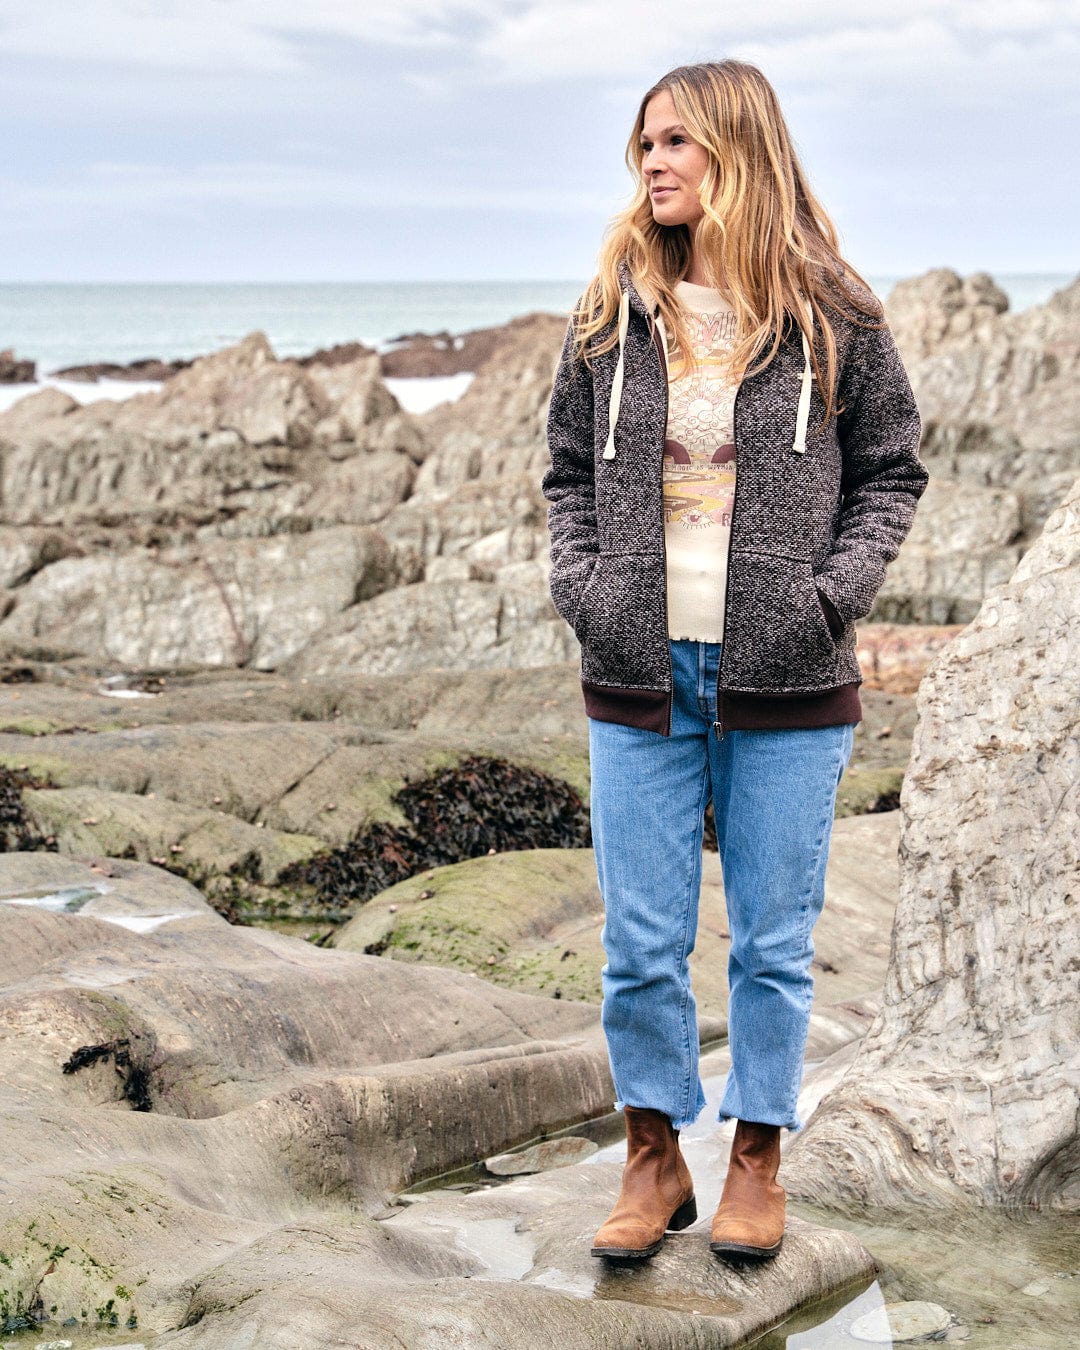 A woman wearing a Saltrock badge stands on textured knit rocks next to the ocean, donning a Sofie - Womens Borg Lined Zip Hoodie - Brown.